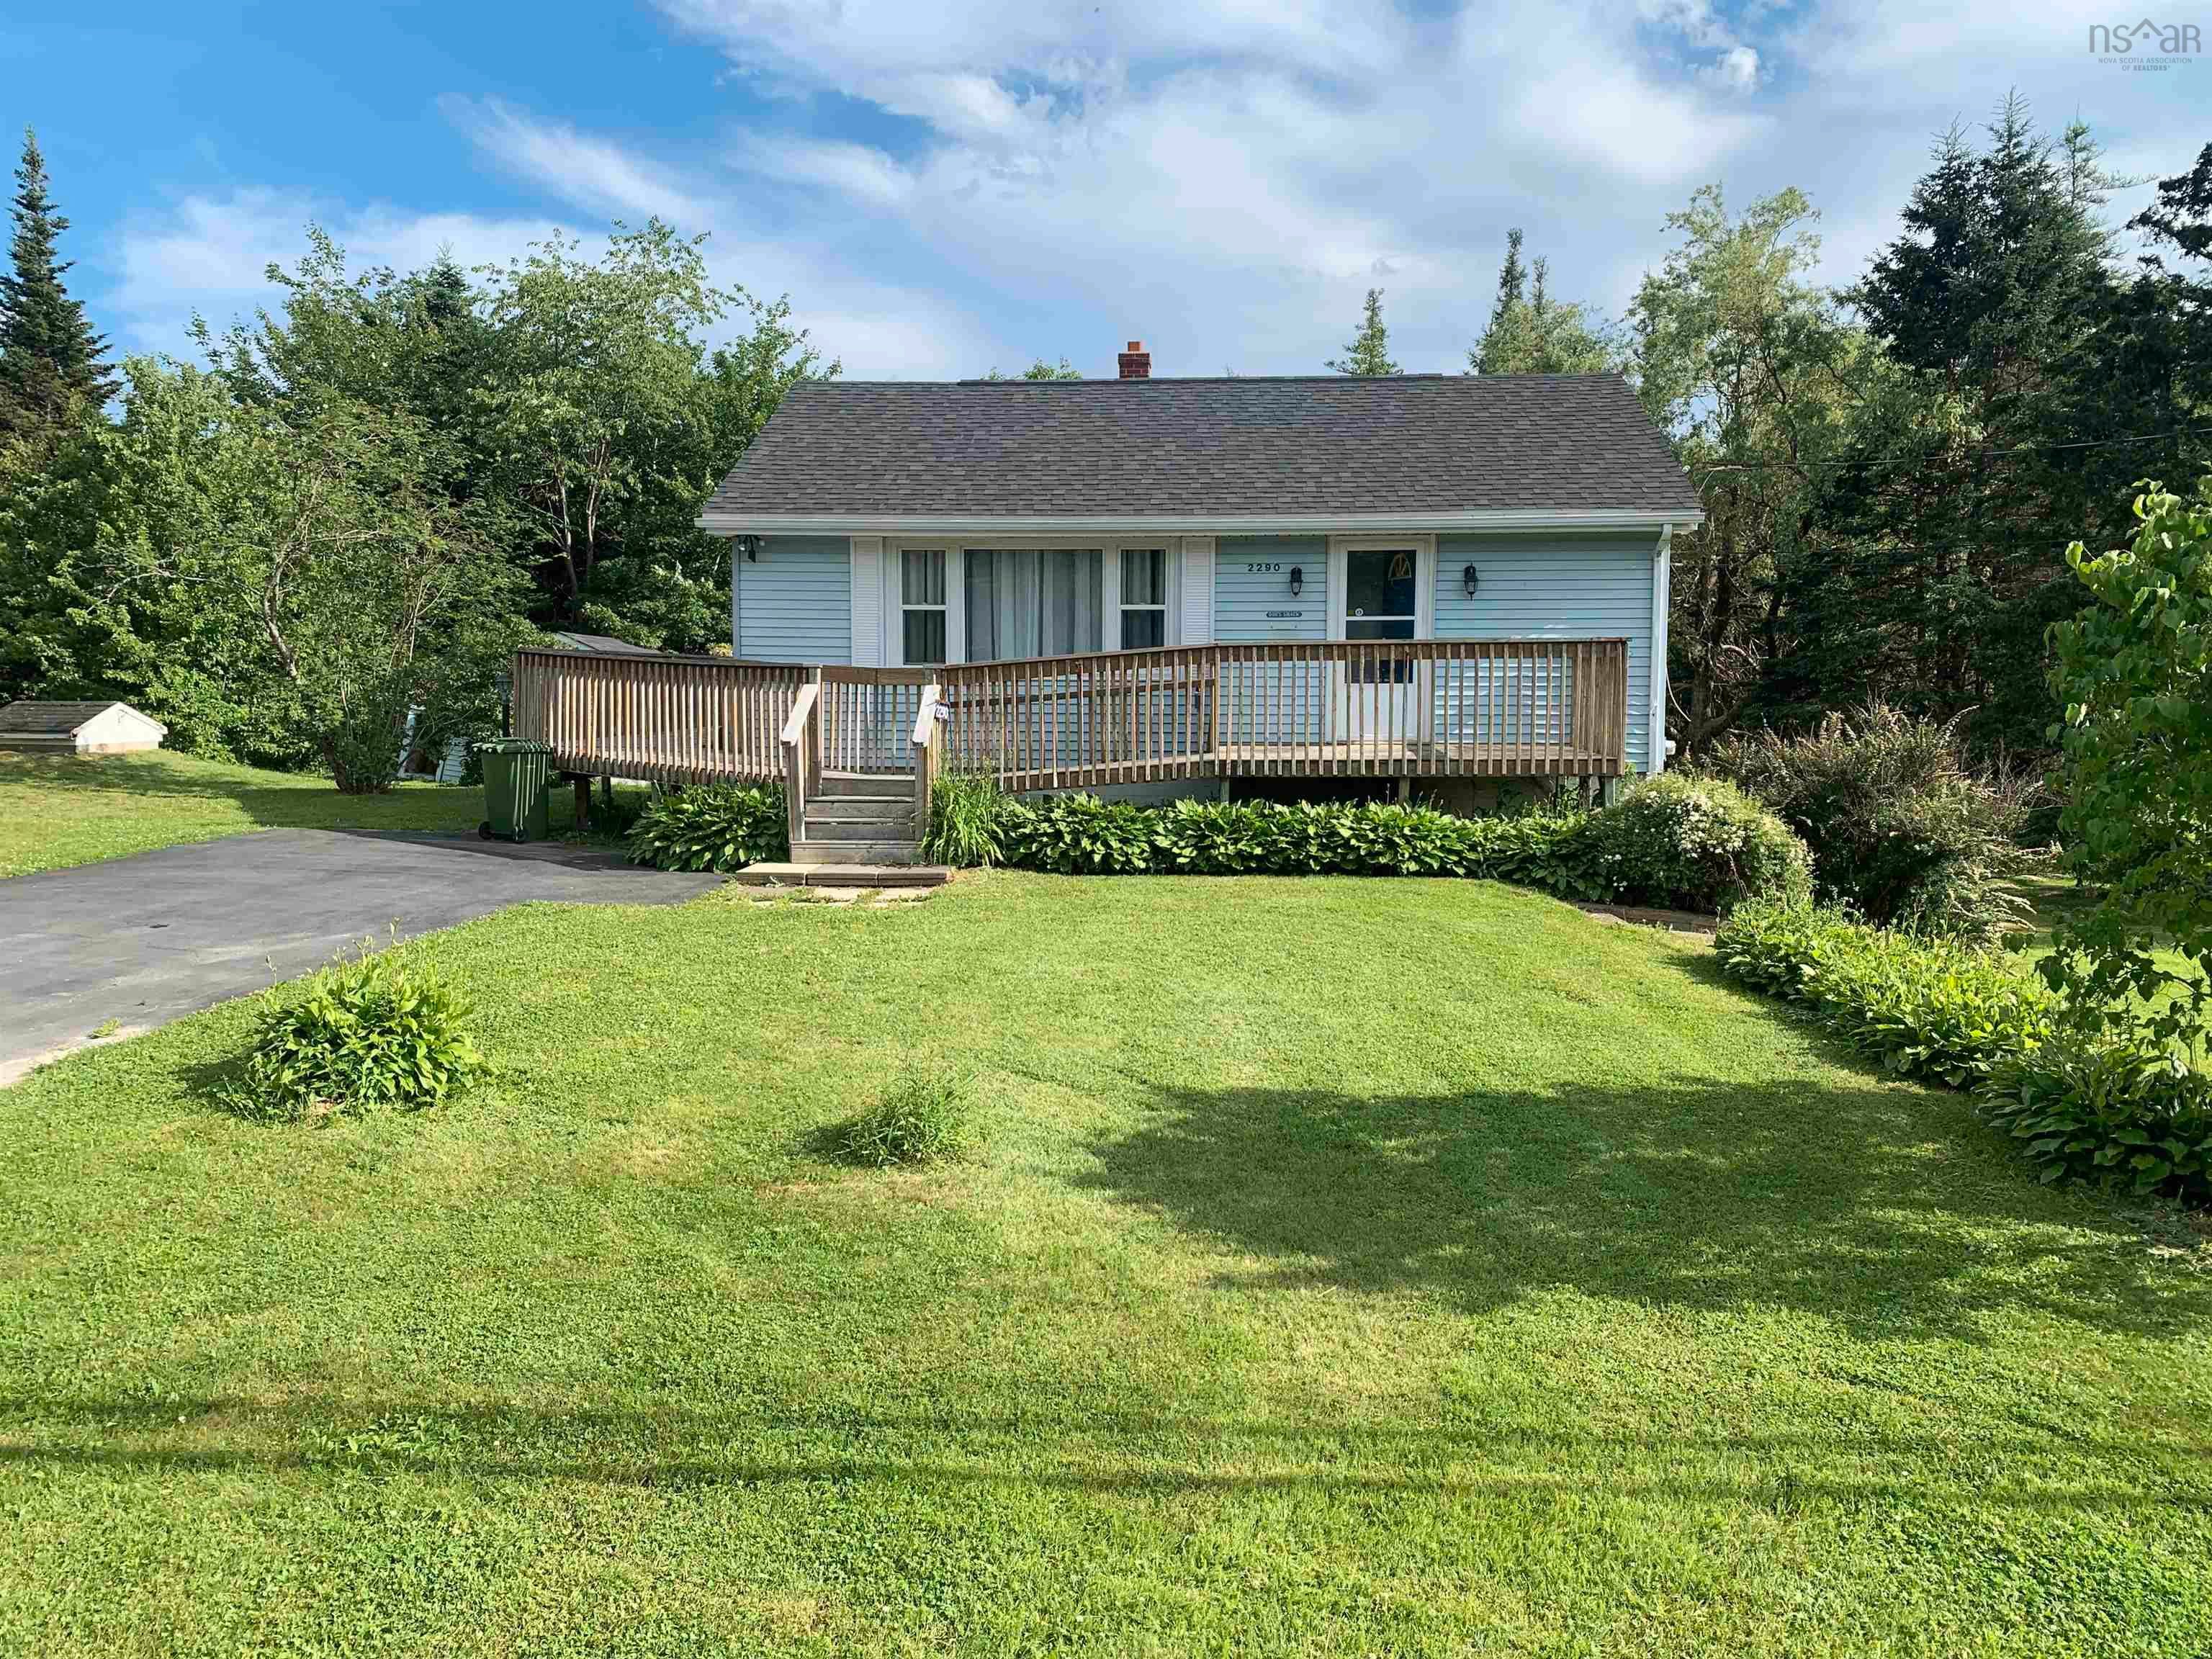 Main Photo: 2290 Lawrencetown Road in Lawrencetown: 31-Lawrencetown, Lake Echo, Port Residential for sale (Halifax-Dartmouth)  : MLS®# 202216363